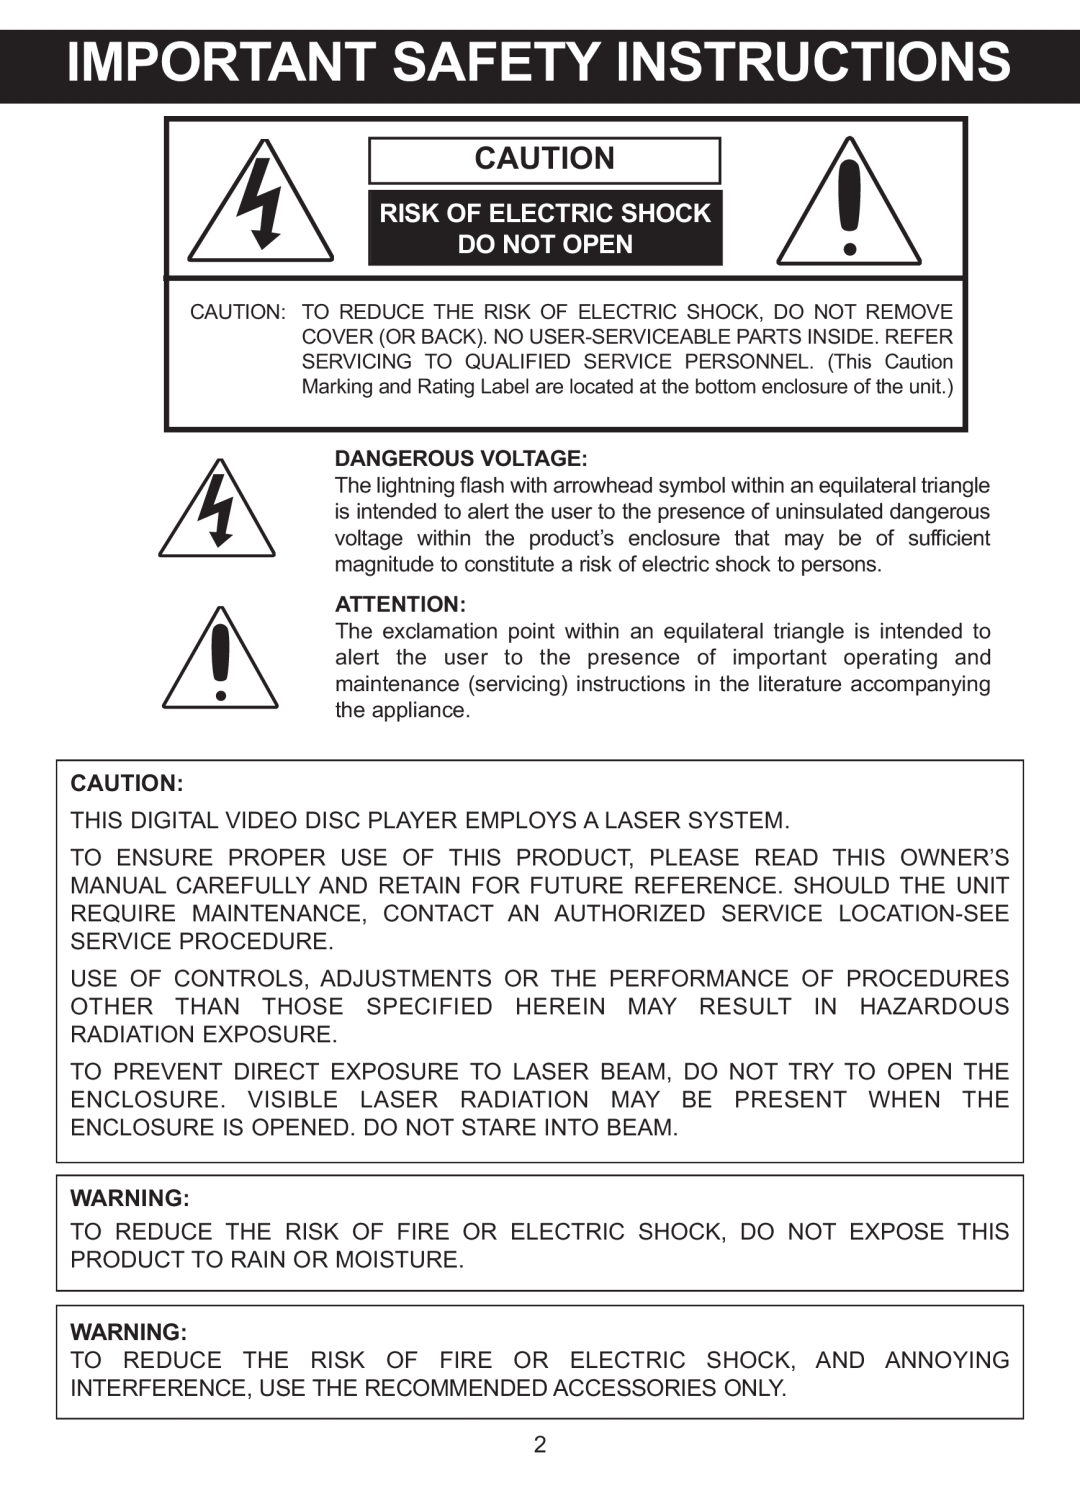 Memorex MVDP1088 manual Important Safety Instructions, Risk Of Electric Shock Do Not Open 